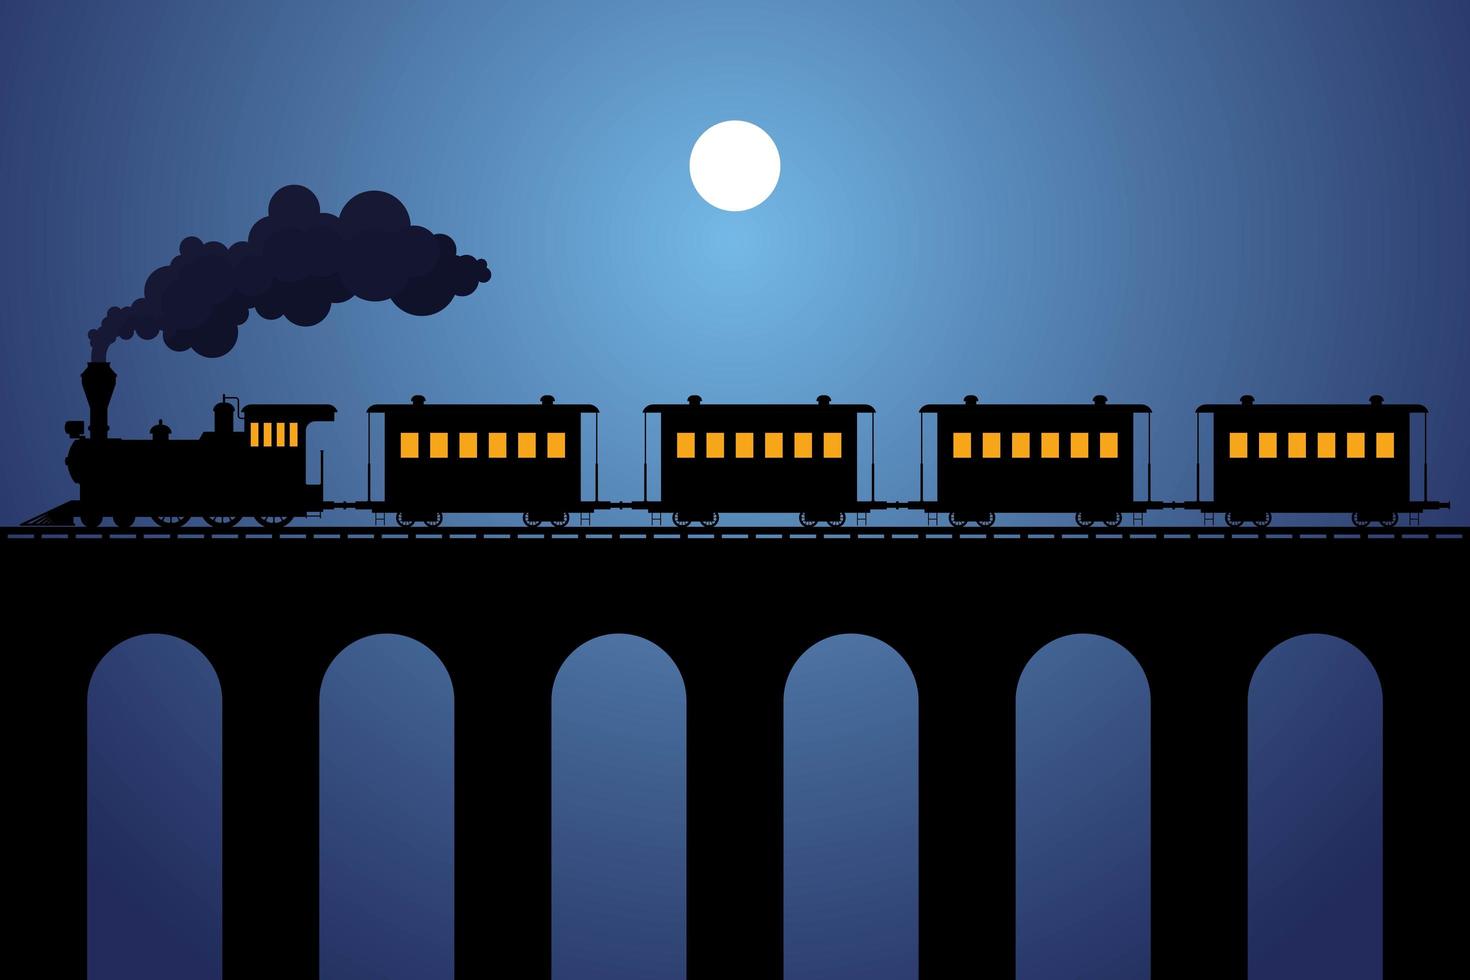 Steam train silhouette with wagons on the bridge vector